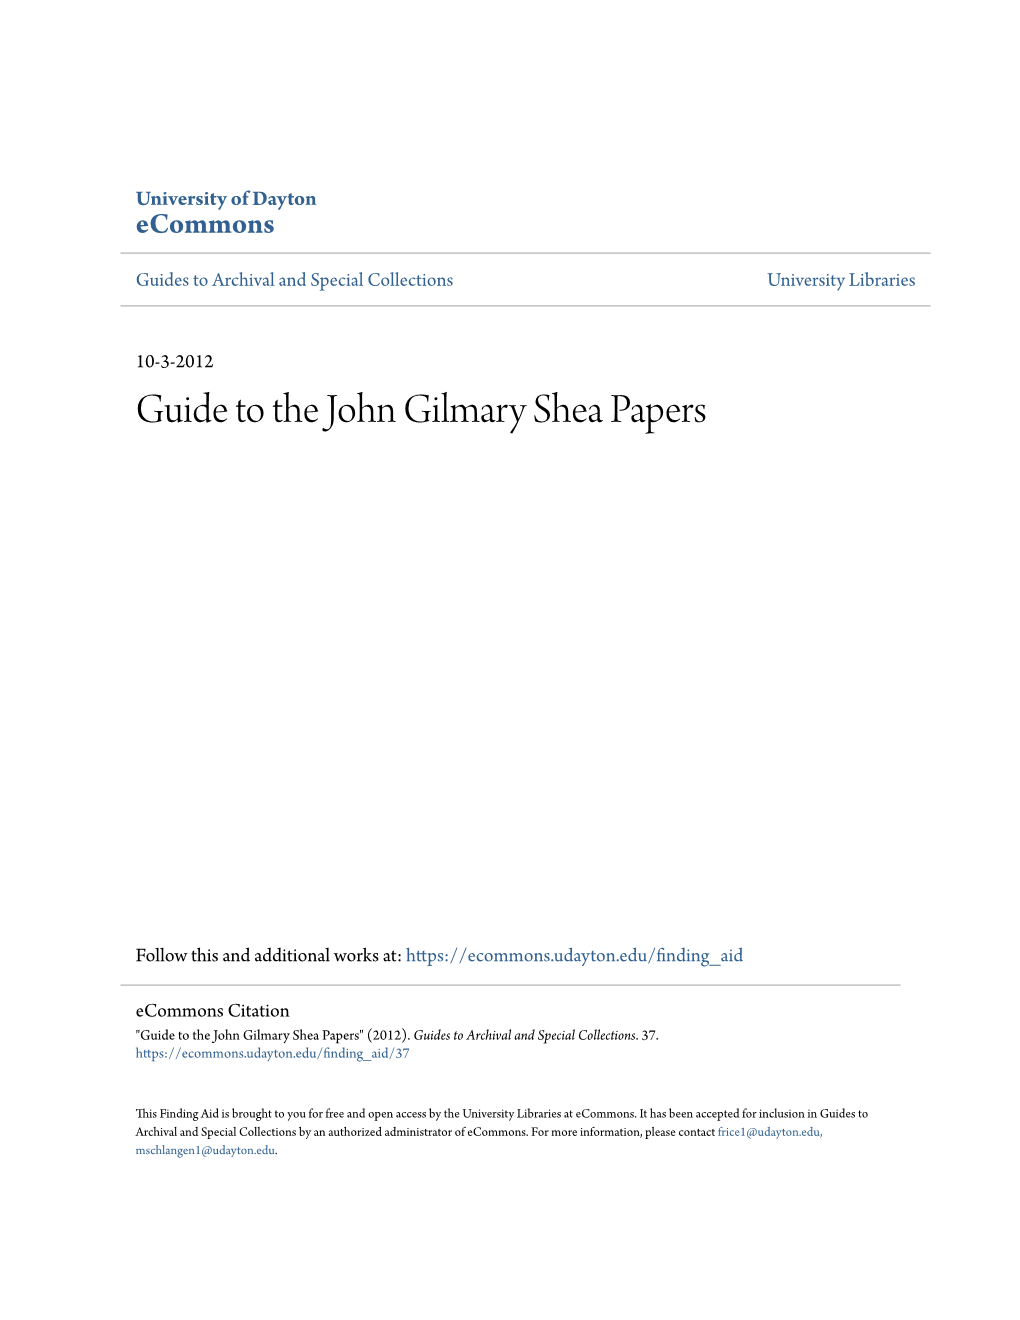 Guide to the John Gilmary Shea Papers